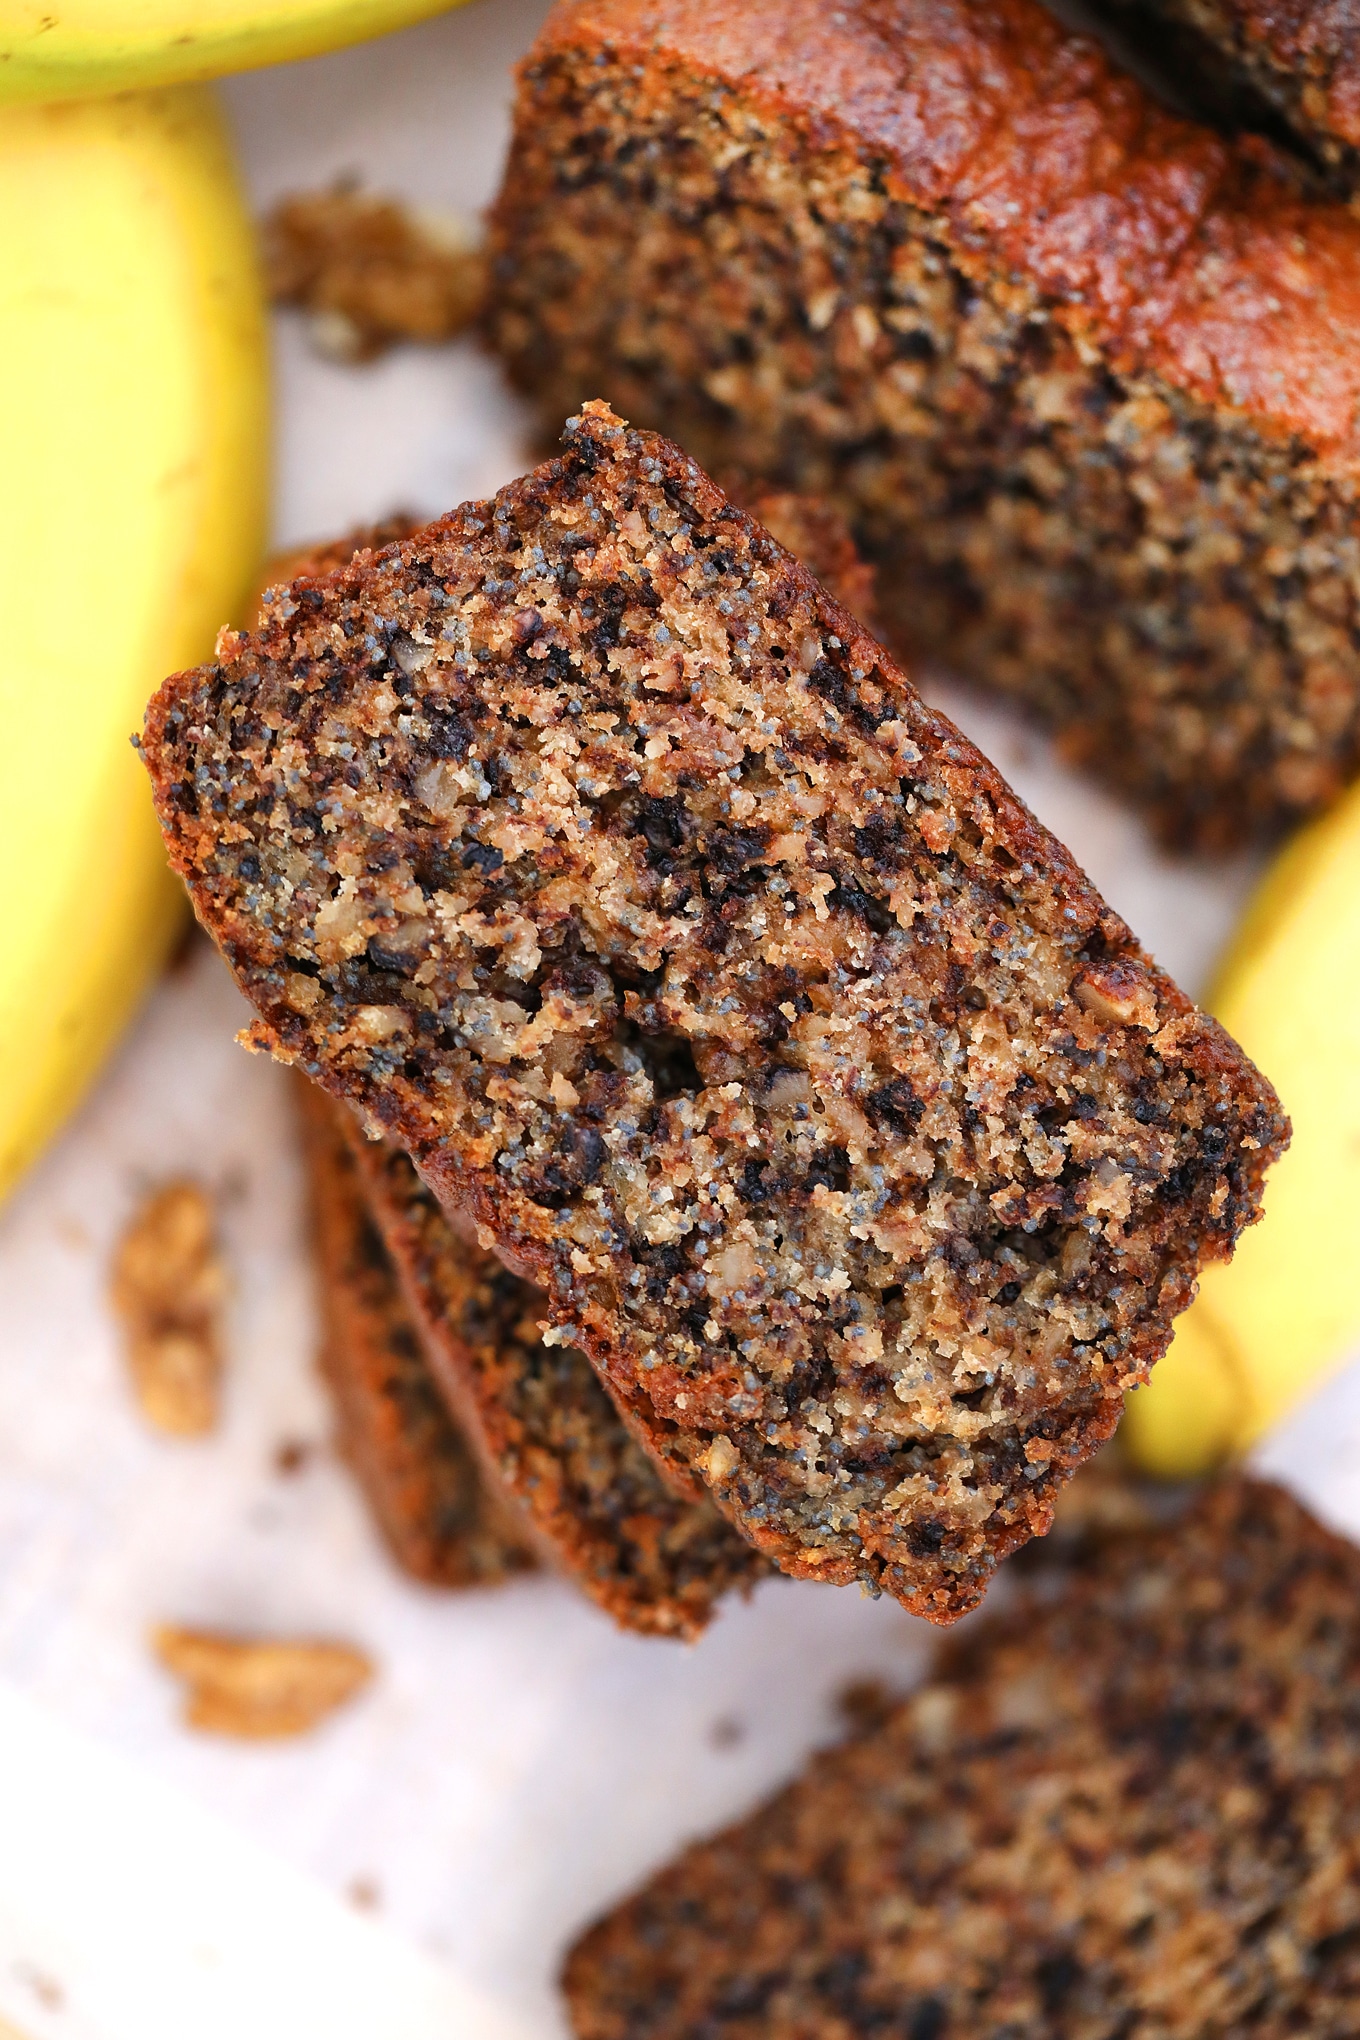 Poppy Seeds Walnut Banana Bread Video Sweet And Savory Meals,Coin Shops In Tucson